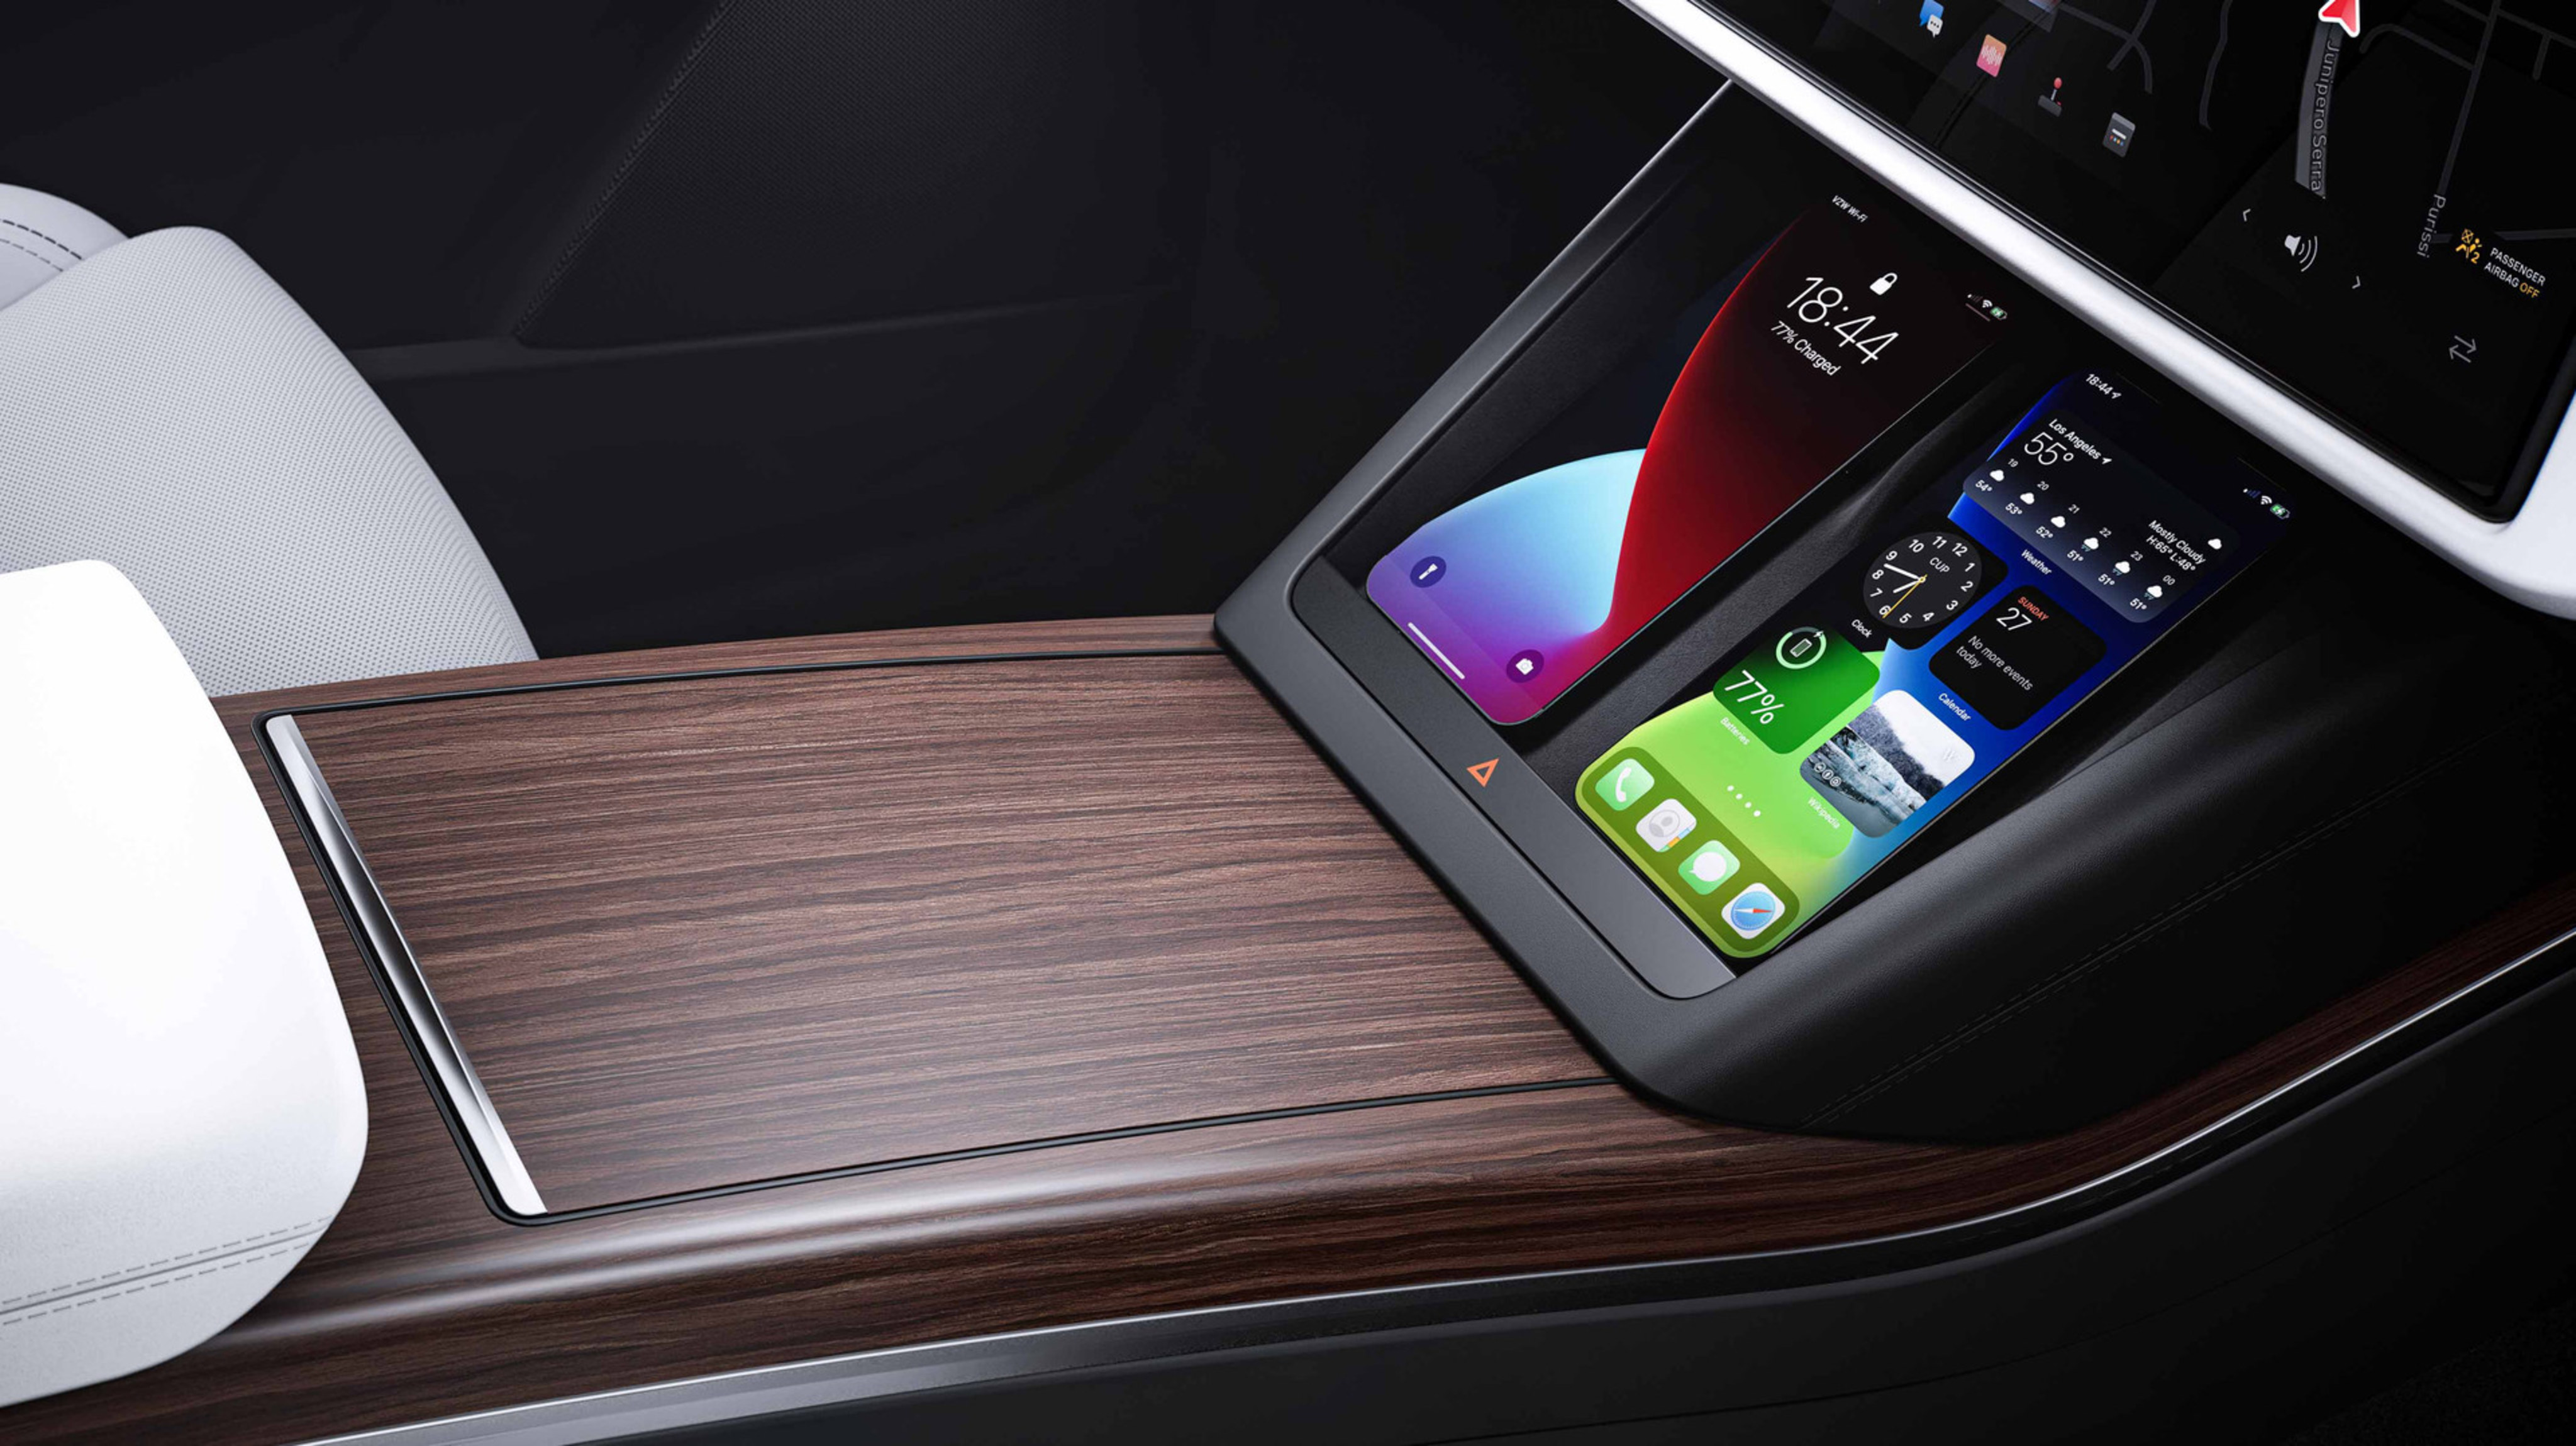 Interior shot from the passenger seat point of view of the console showing two smartphones charging wirelessly